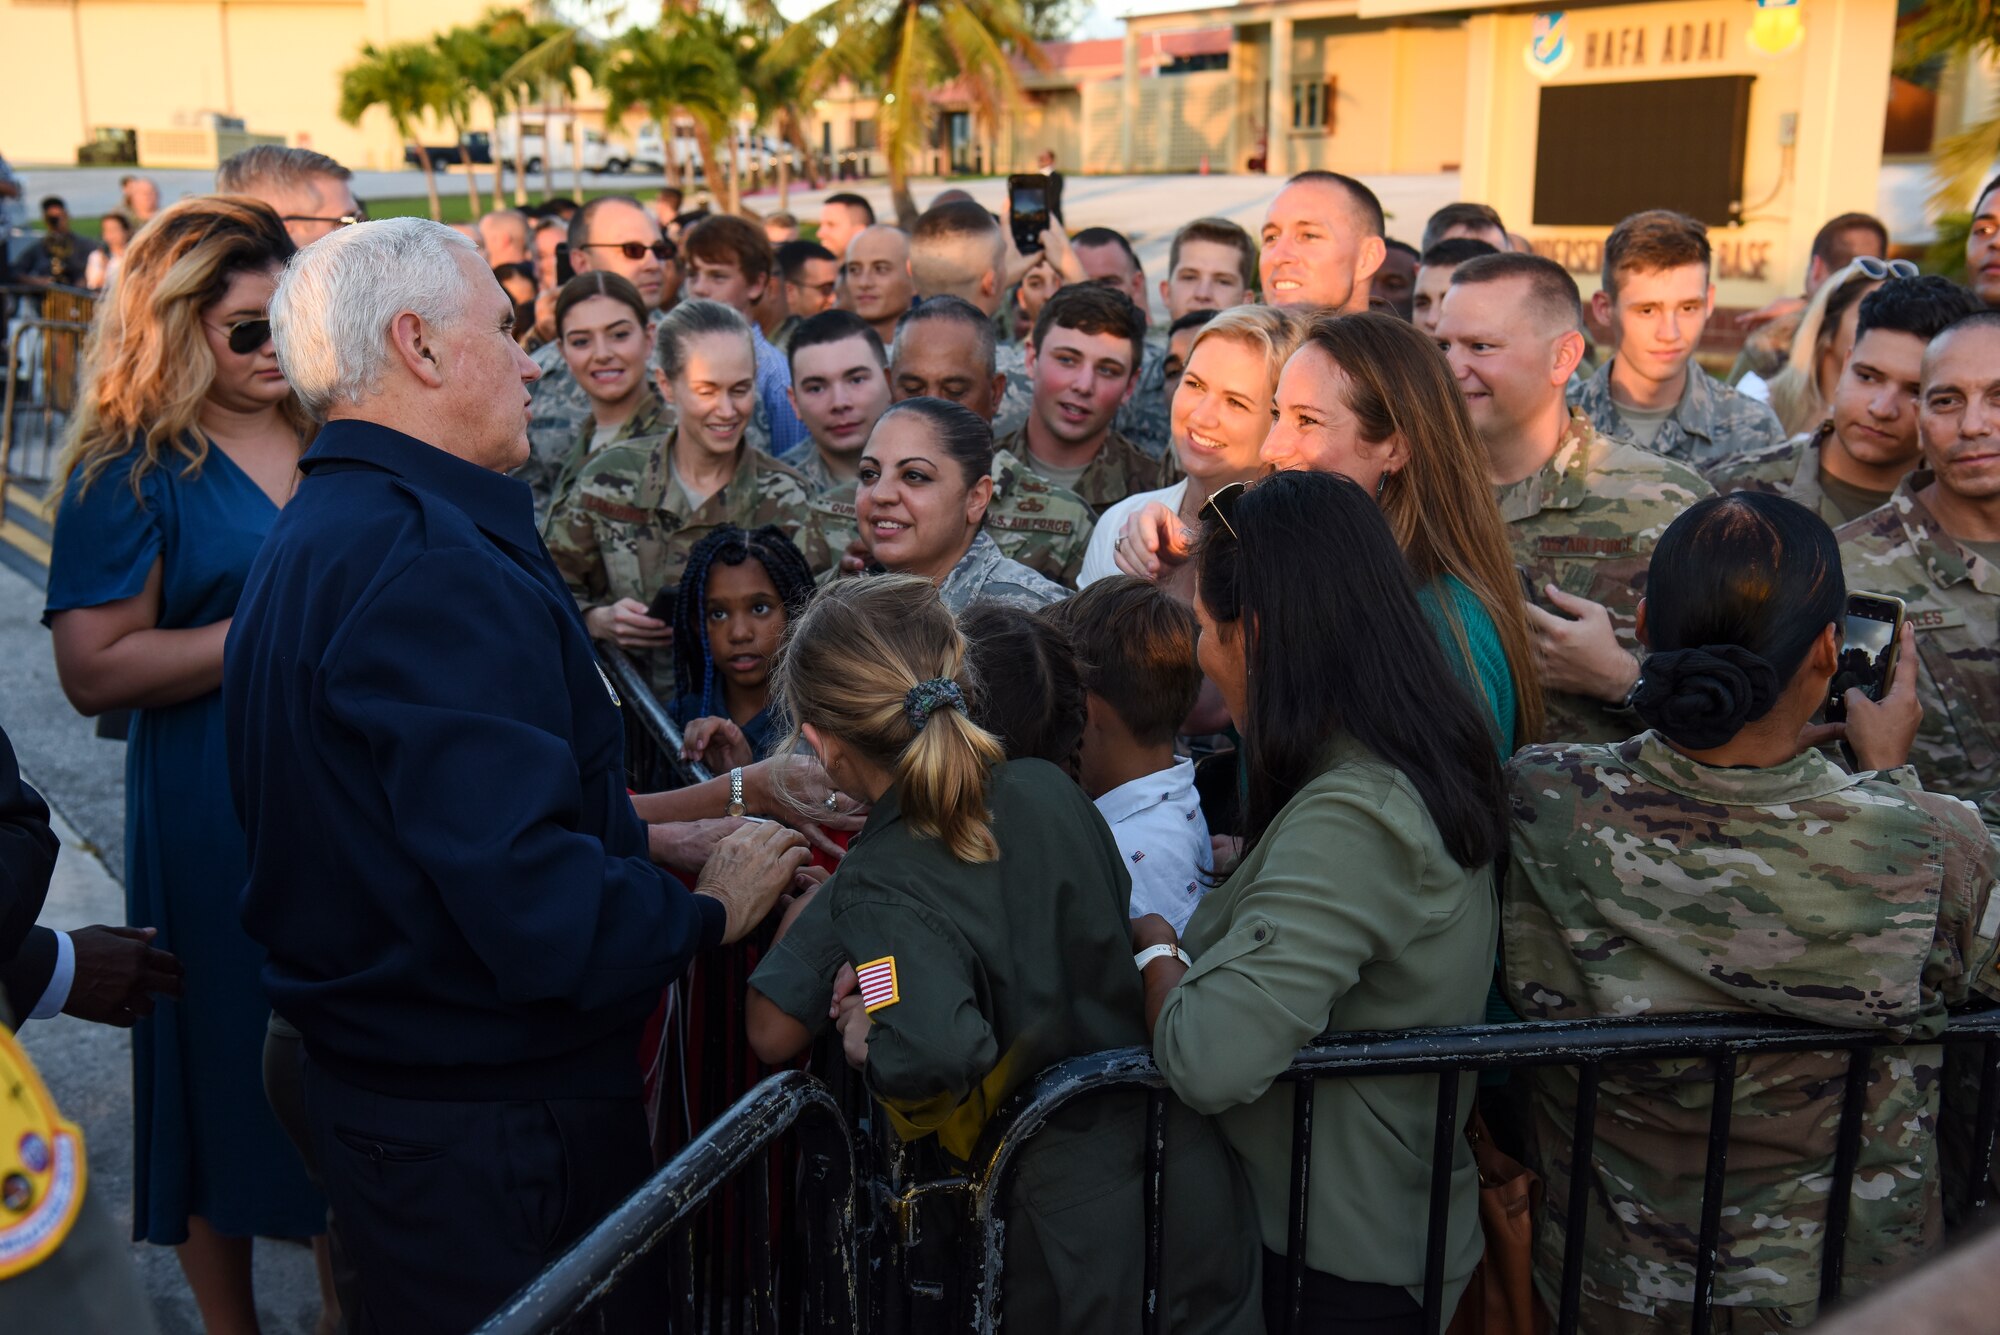 Vice President of the United States Michael Pence greets service members and their families Nov. 18, 2018, at Andersen Air Force Base, Guam. The Vice President and his wife Karen visited the base to meet with Airmen and their families before the holidays. (U.S. Air Force photo by Senior Airman Christopher Quail)